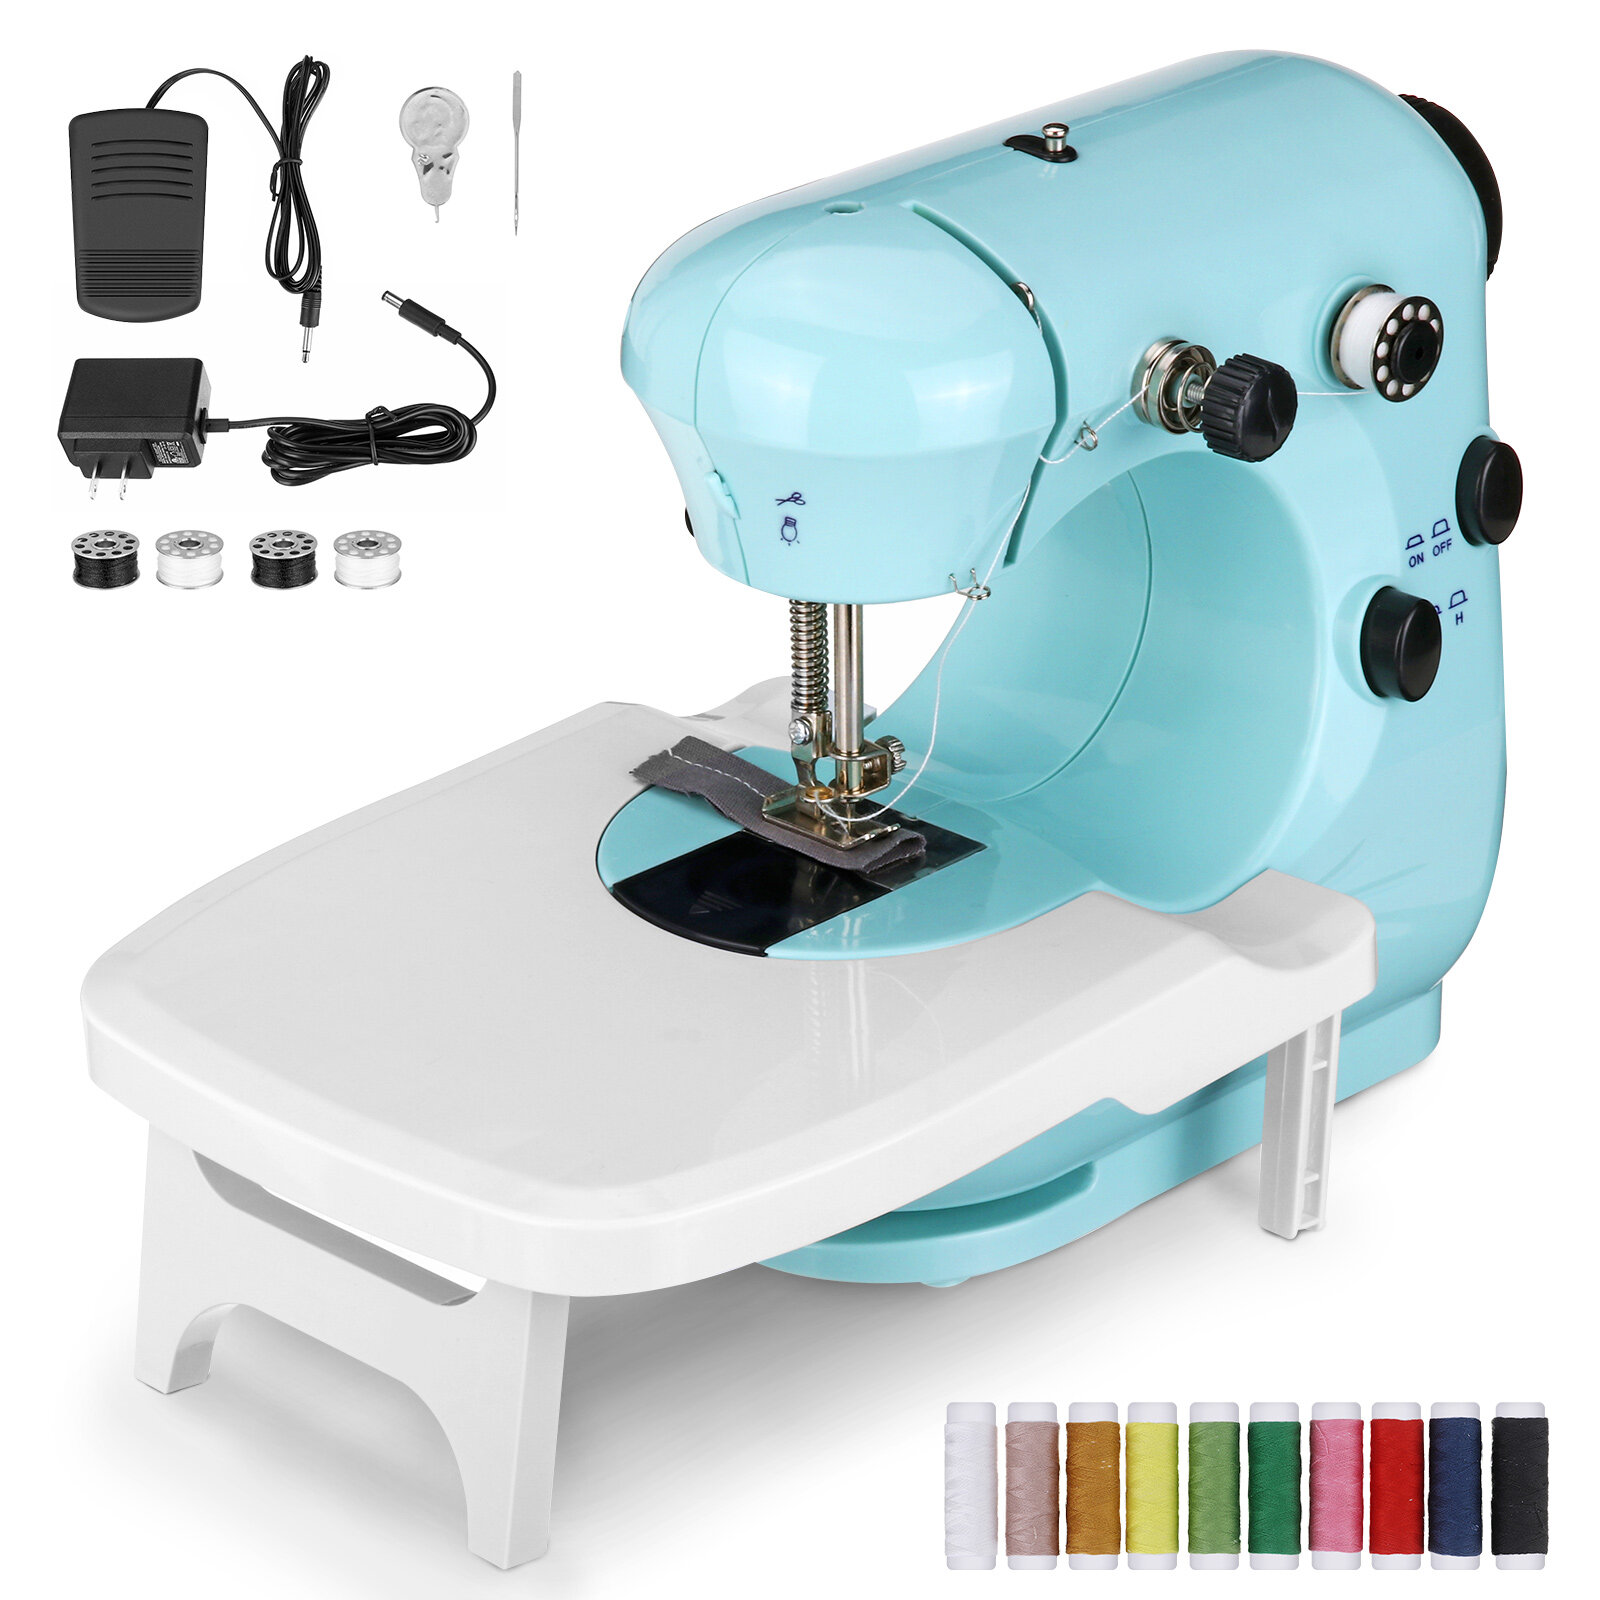 Image of CHARMINER Mini Sewing Machine Double Speed Double Thread Sewing Machine